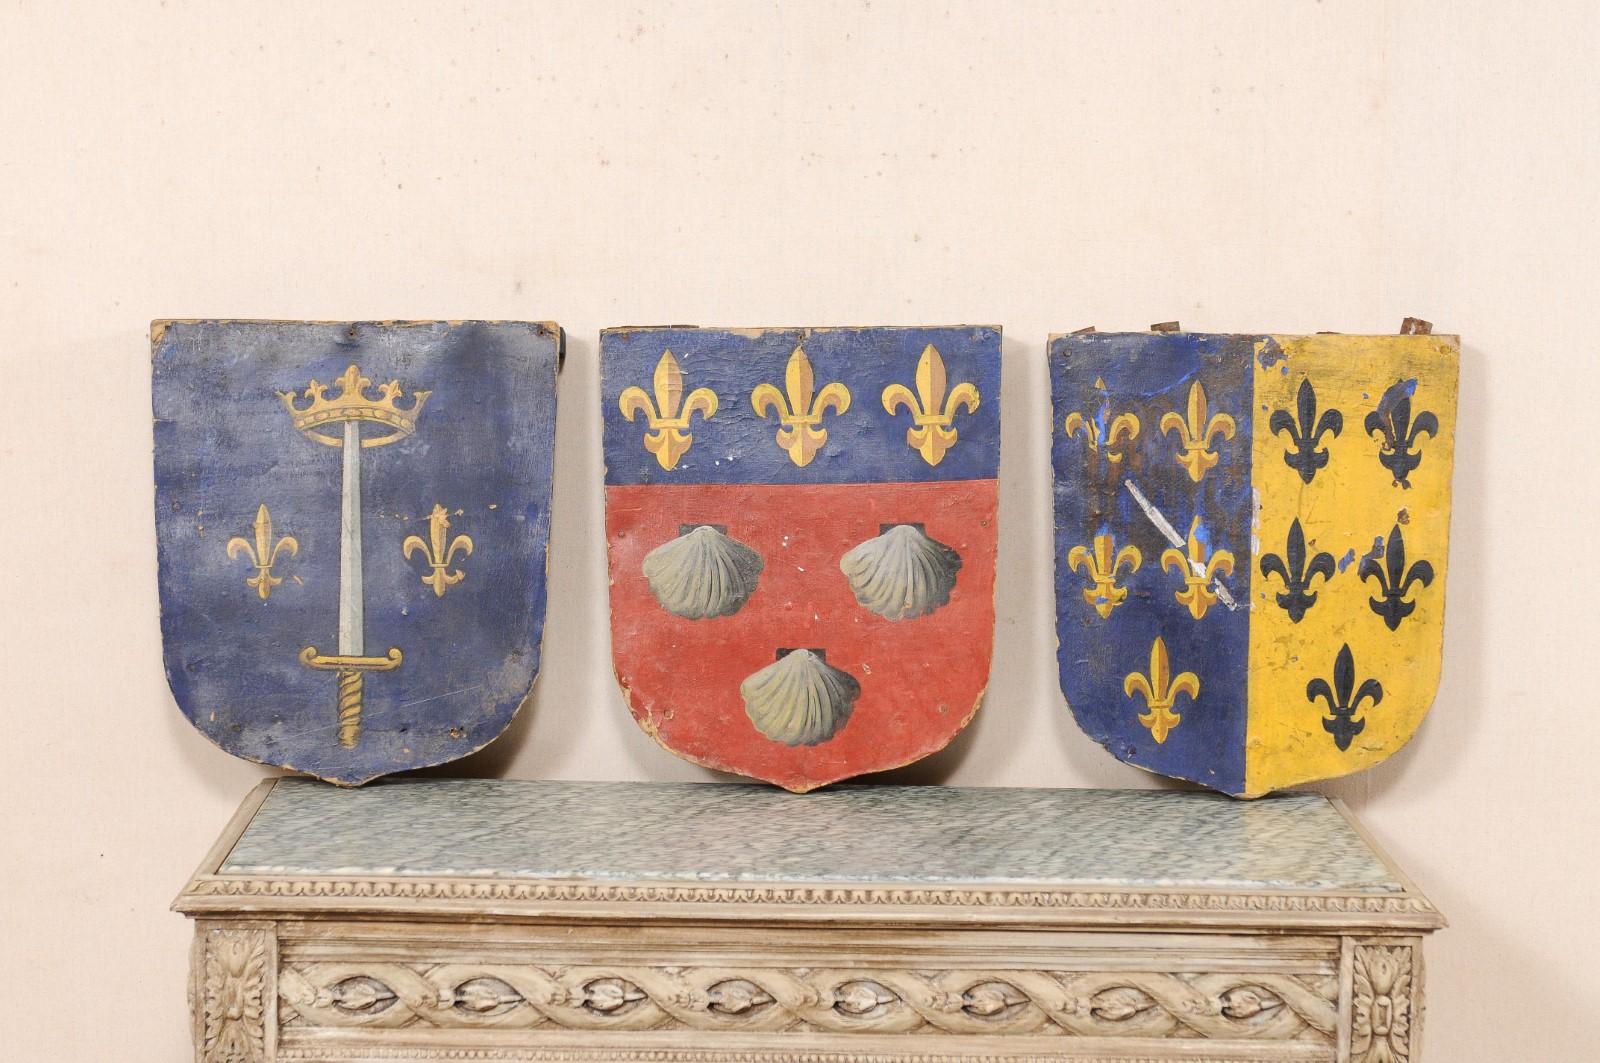 A French set of three processional plaques from the 19th century. These antique processional candle-holder plaques from France each have a shield shape design and feature their original hand-painted finish in a motif of fleur de lis, sword, crown